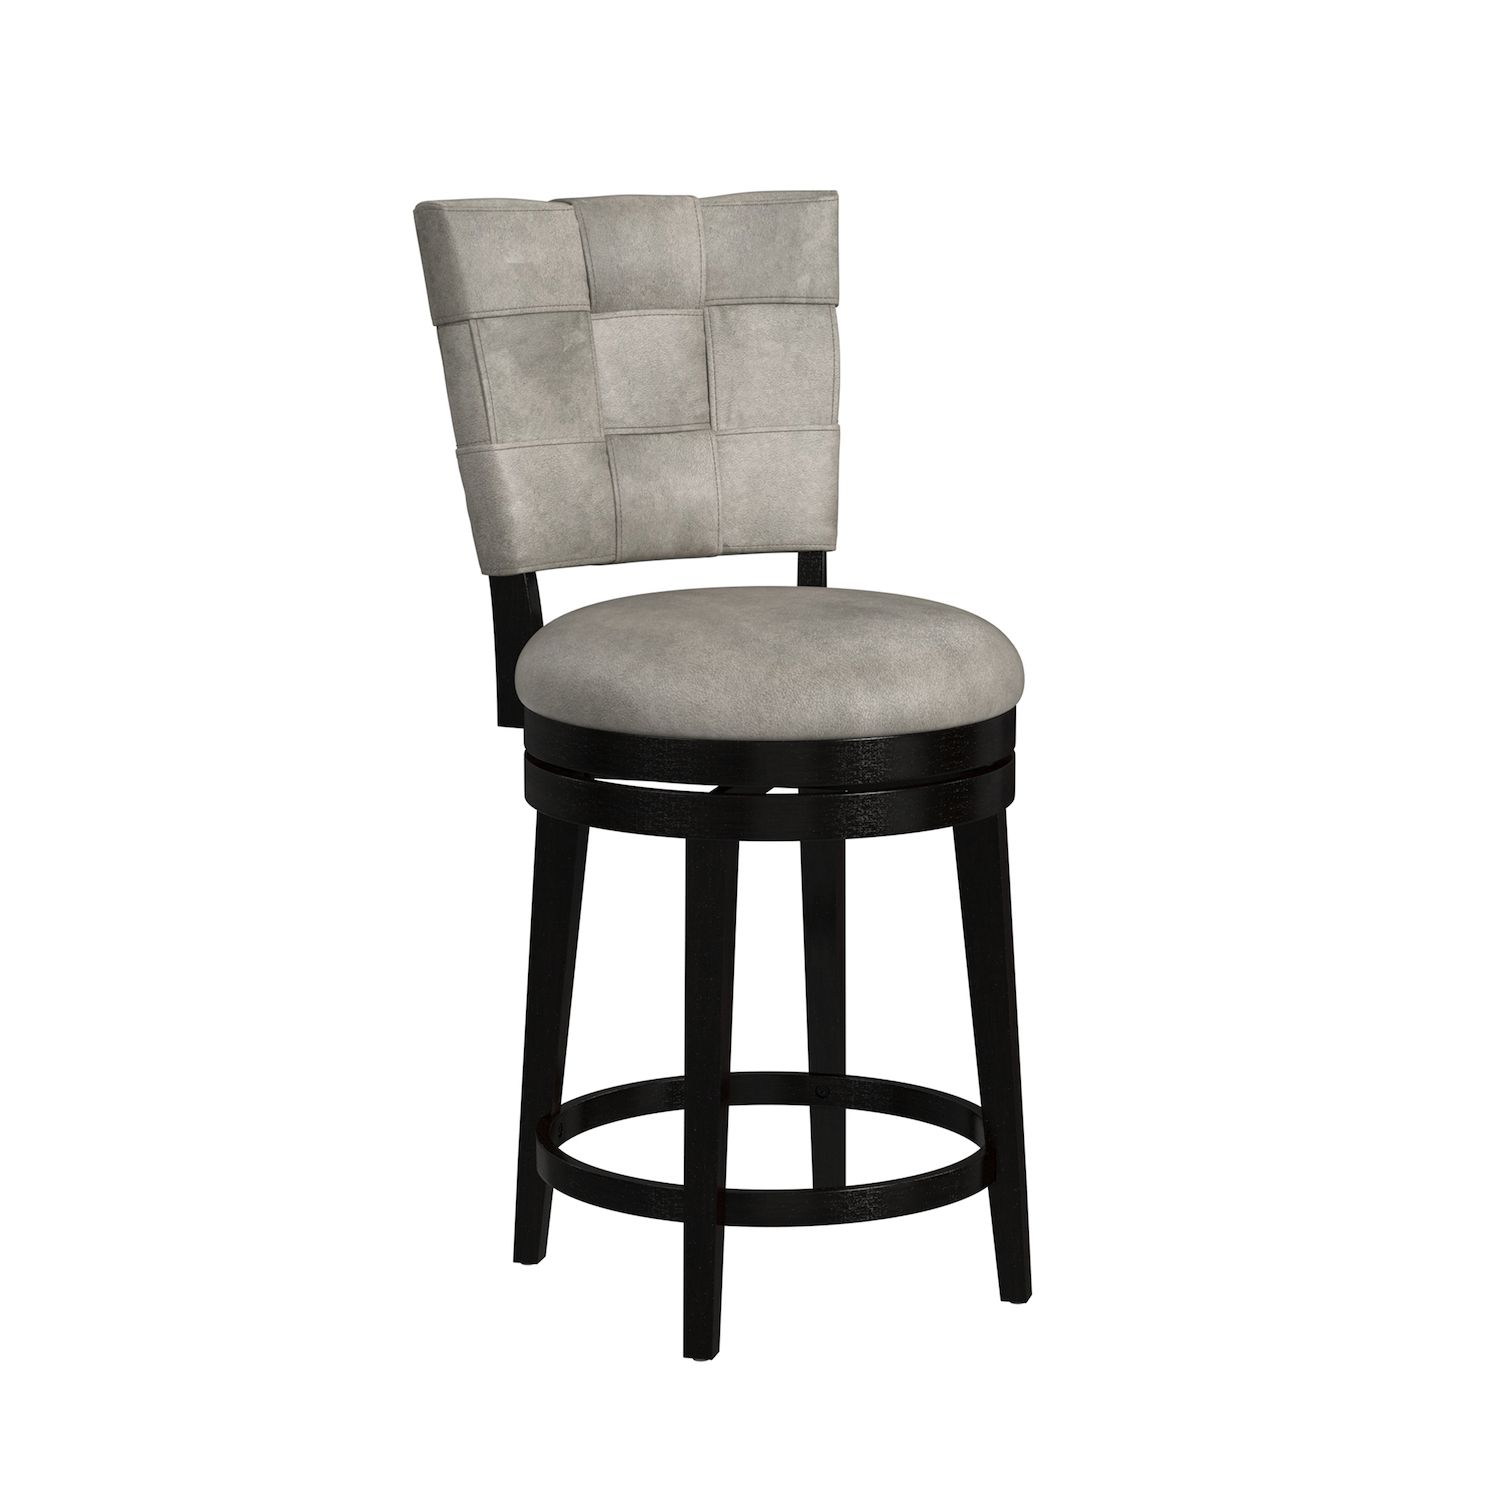 Image for Hillsdale Furniture Kaede Swivel Counter Stool at Kohl's.